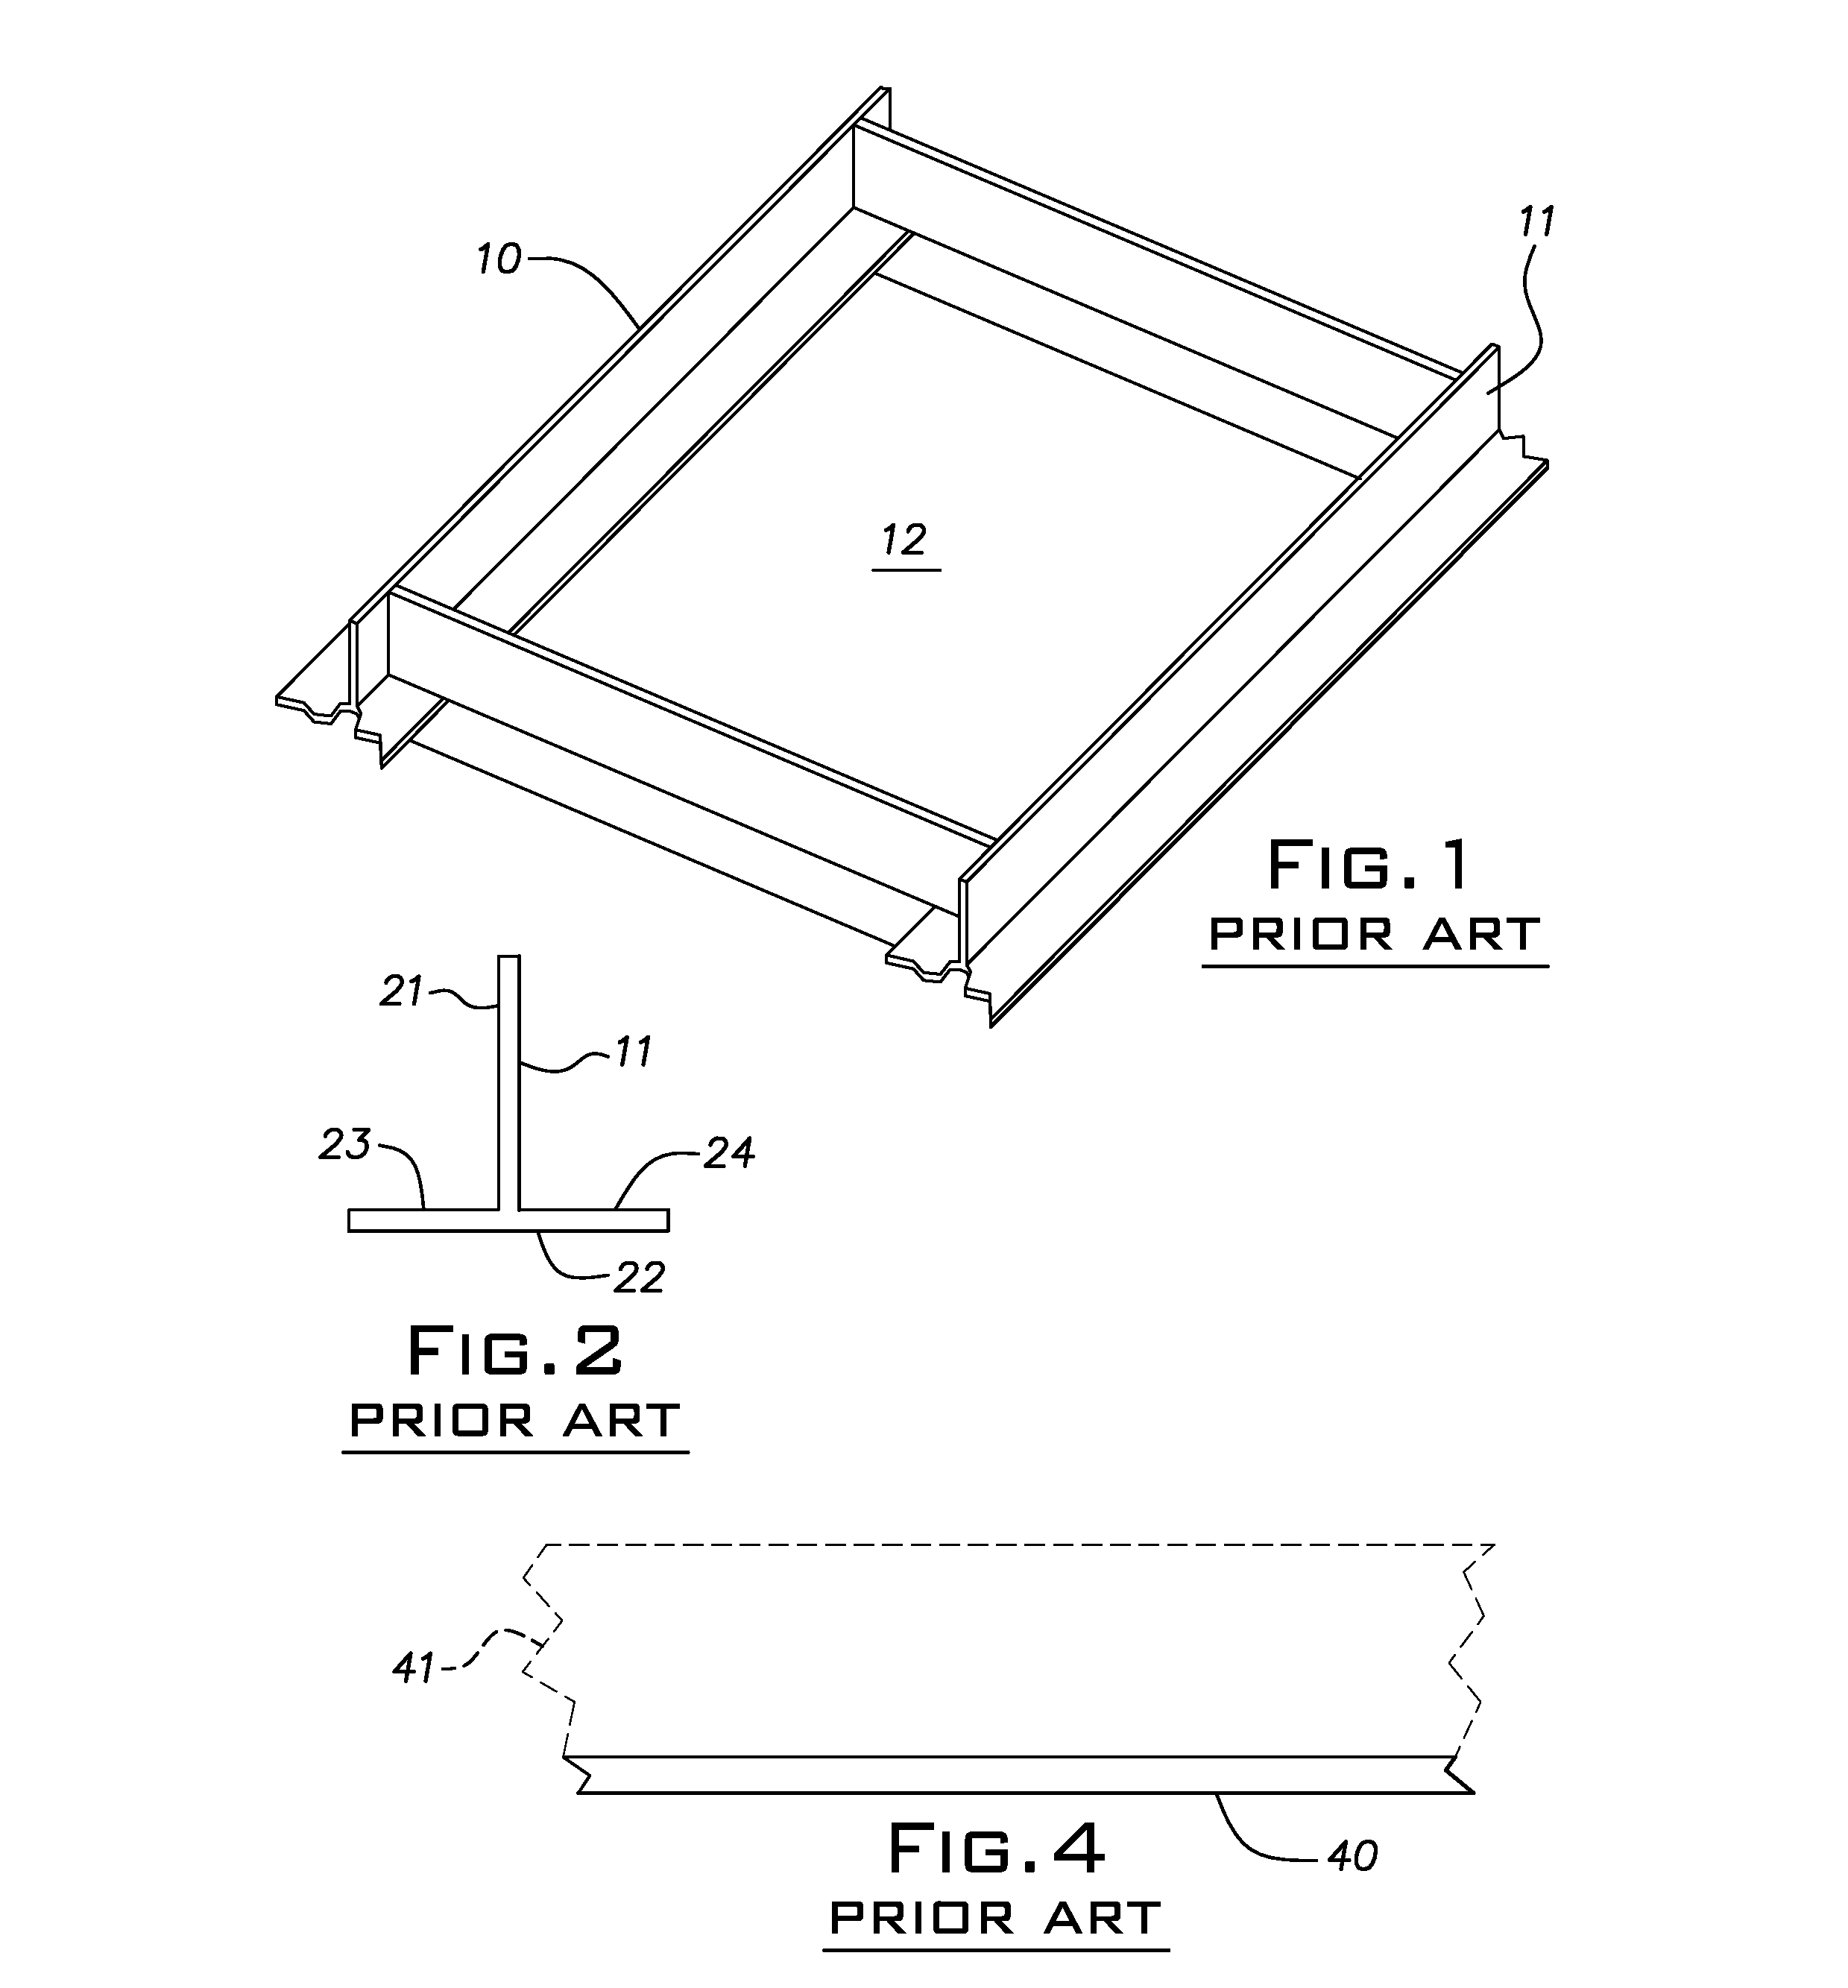 Apparatus, system, and method for facilitating use of thin flexible scrims in a grid-type suspended ceiling